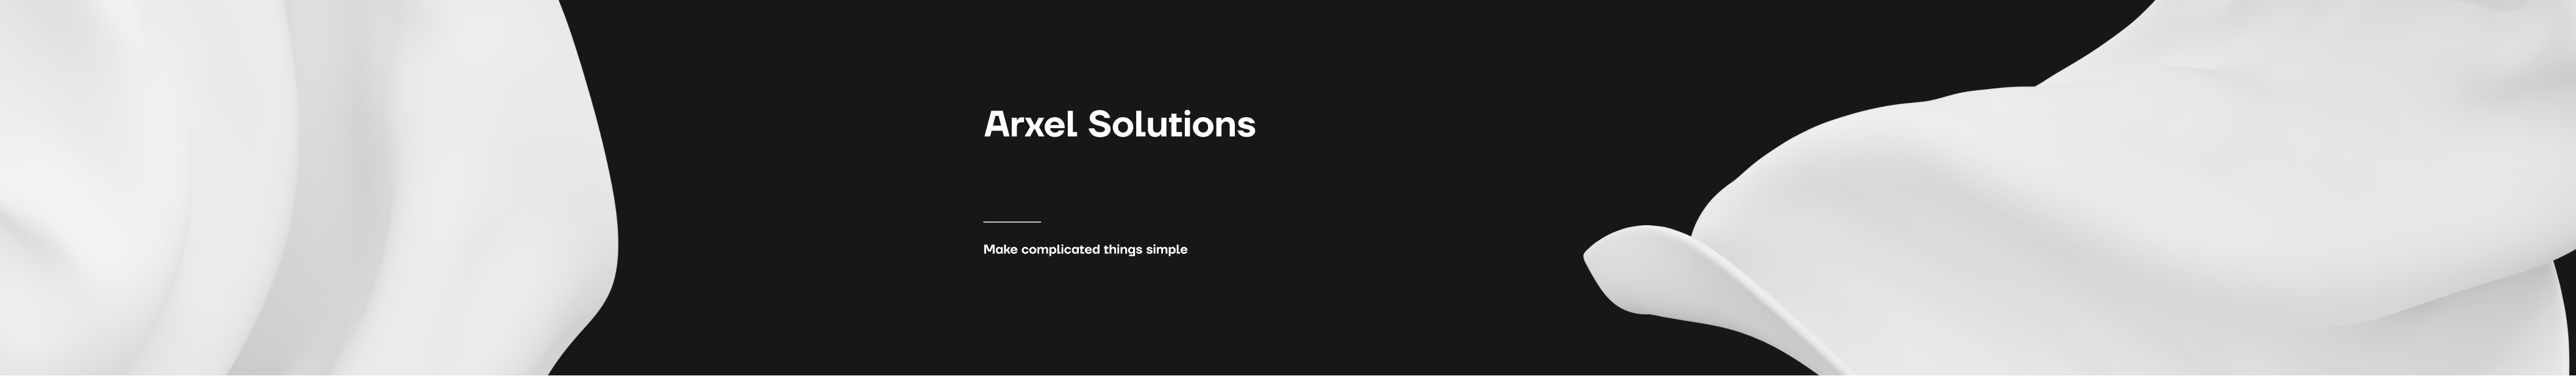 Arxel Solutions's profile banner